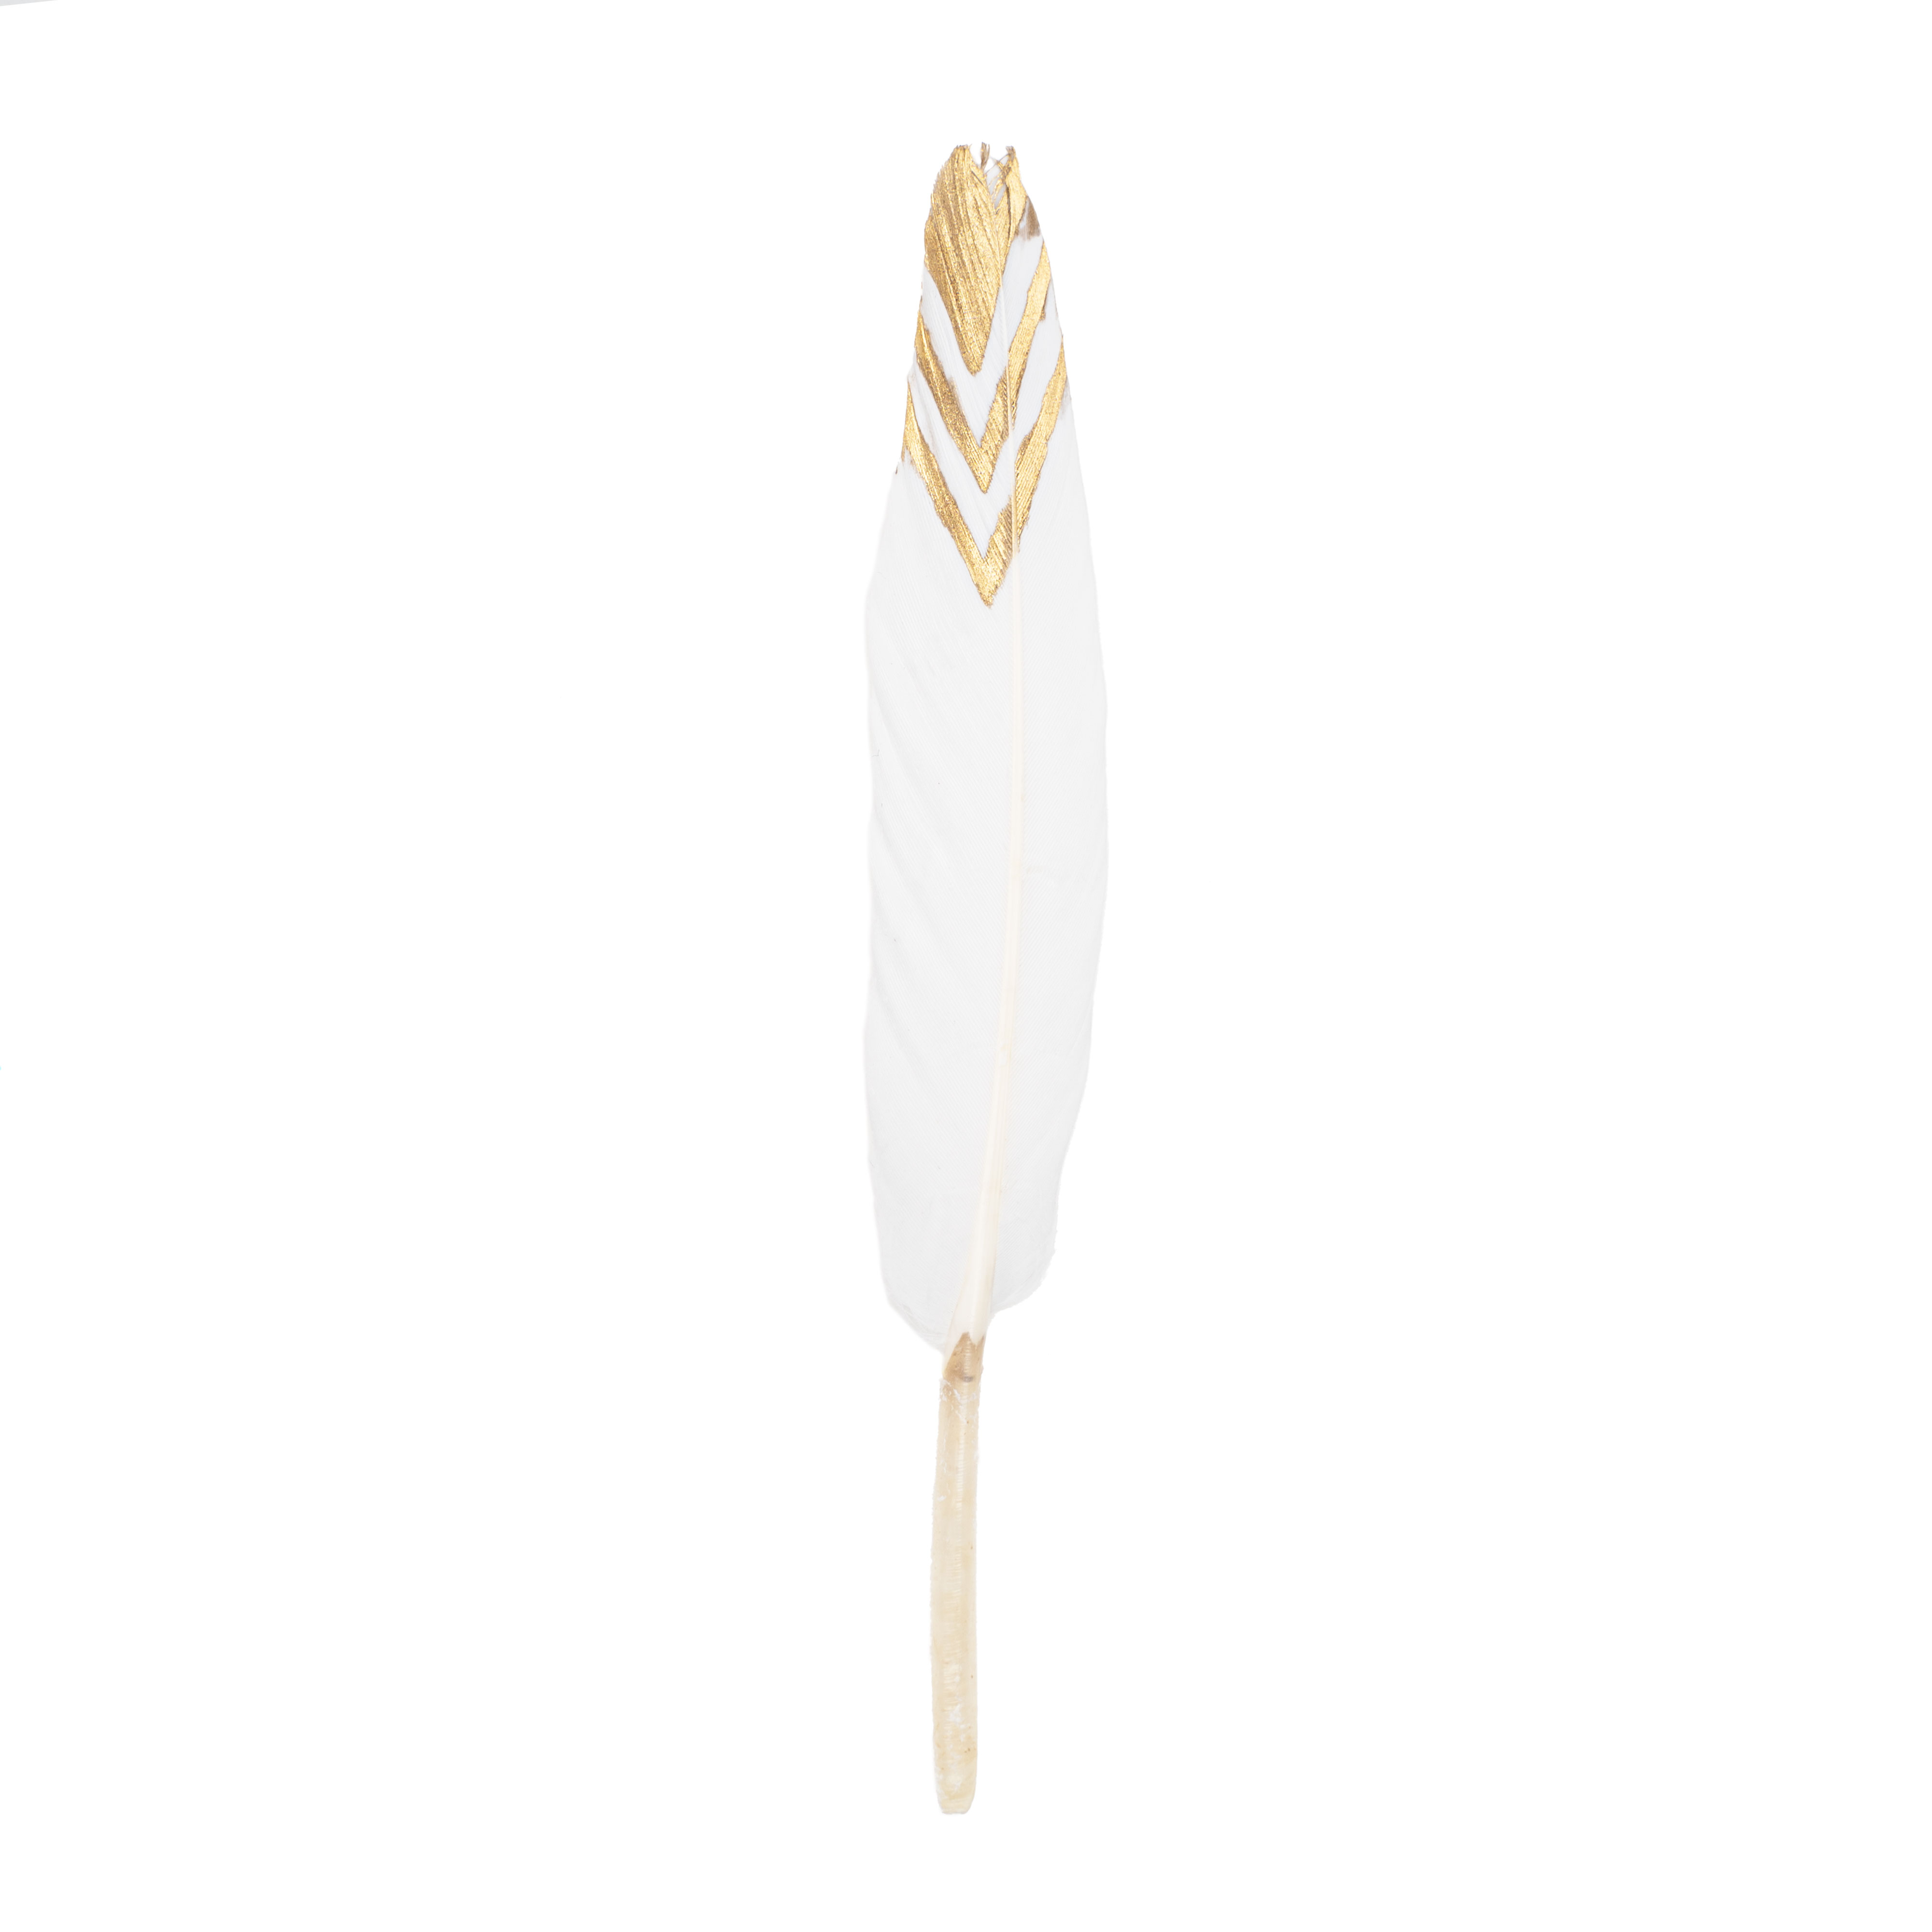 Goose Feathers with Gold Tip 30pc/bag 4½" - 6½" - White